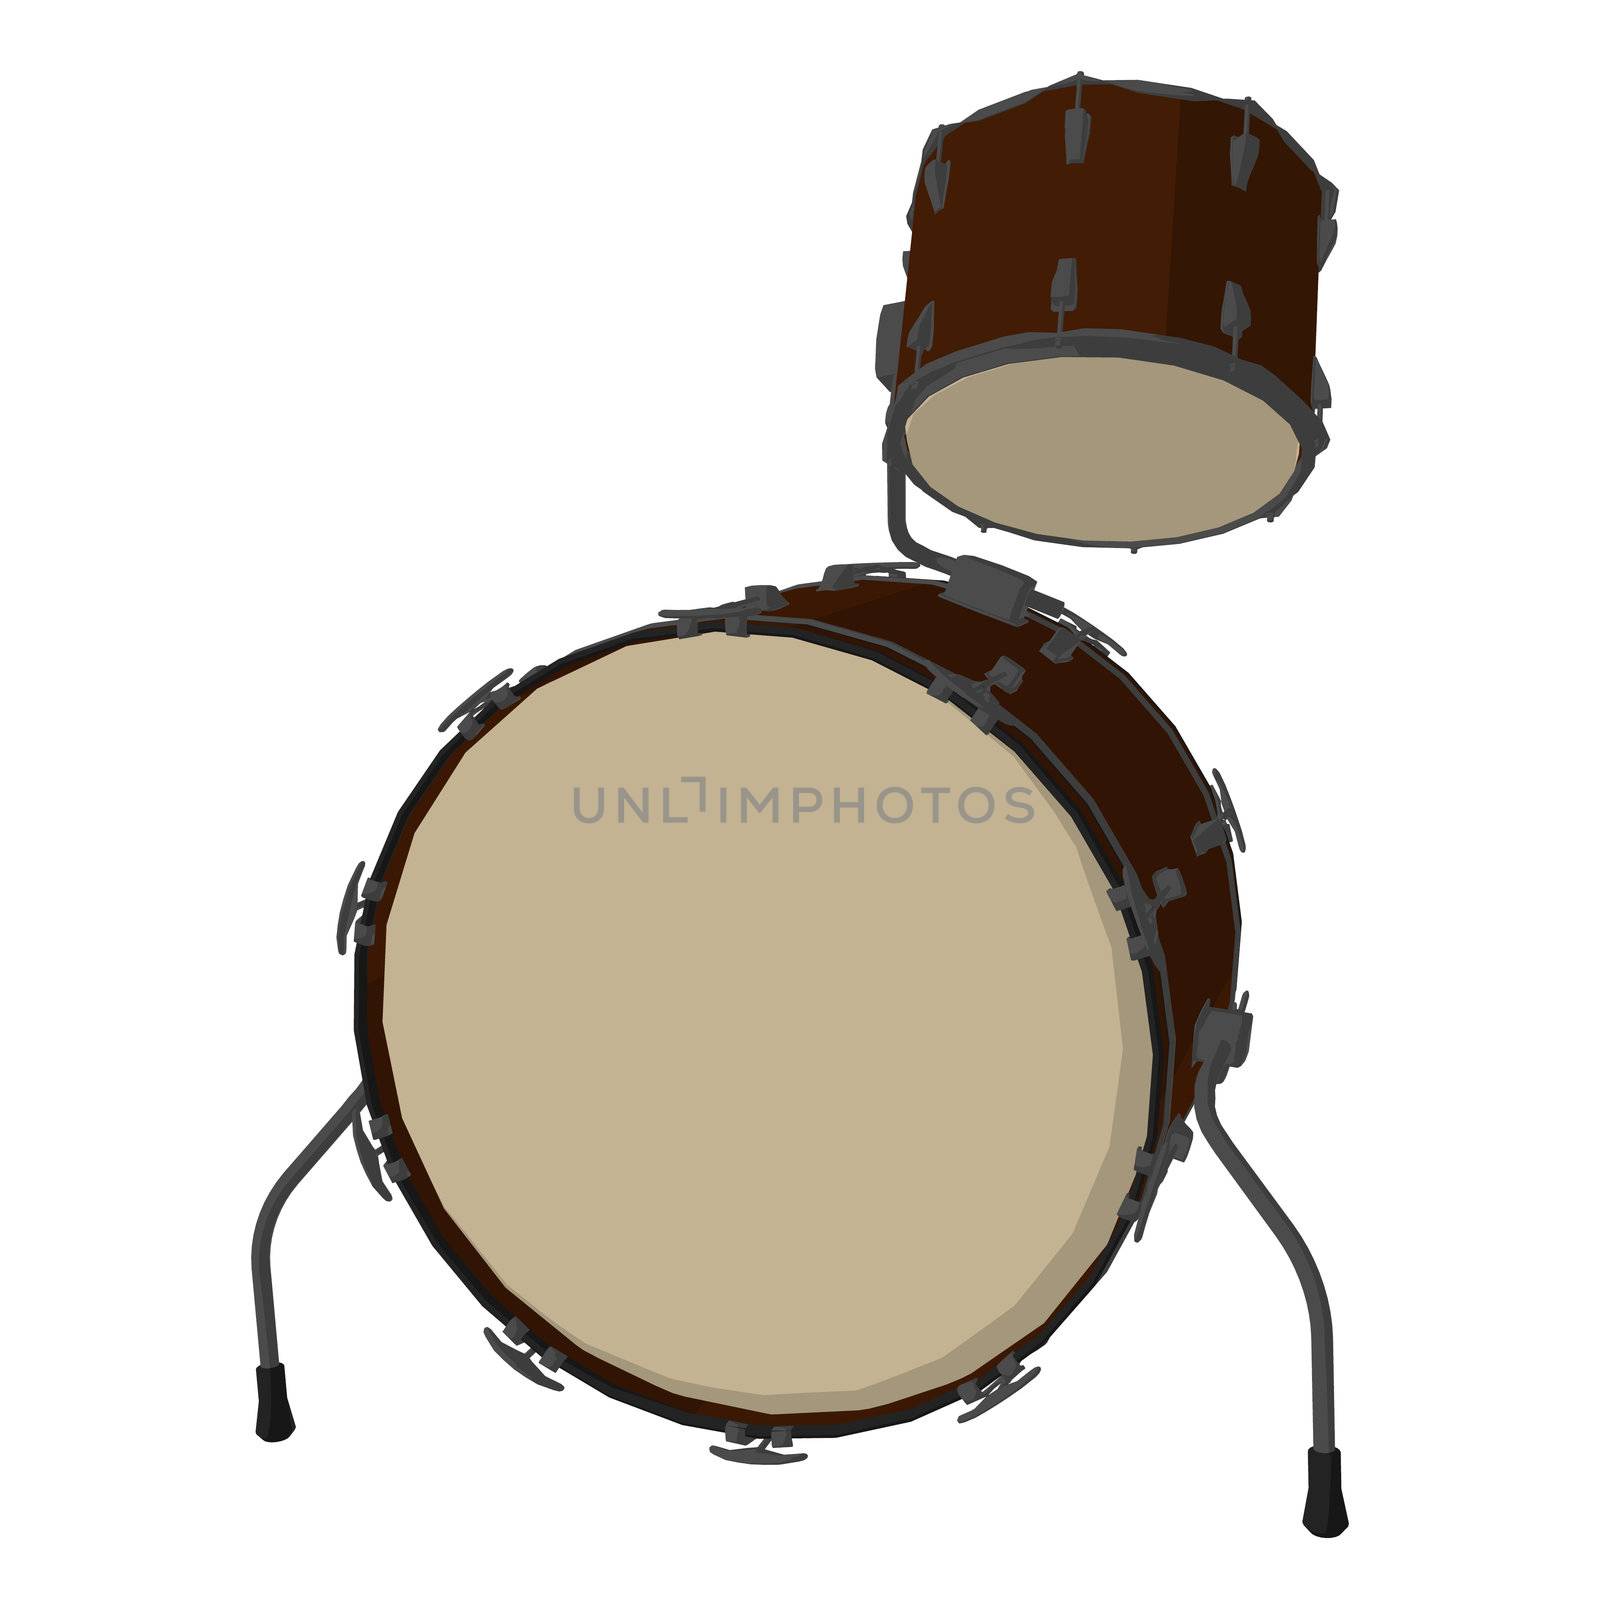 Illustration of drums on a white background